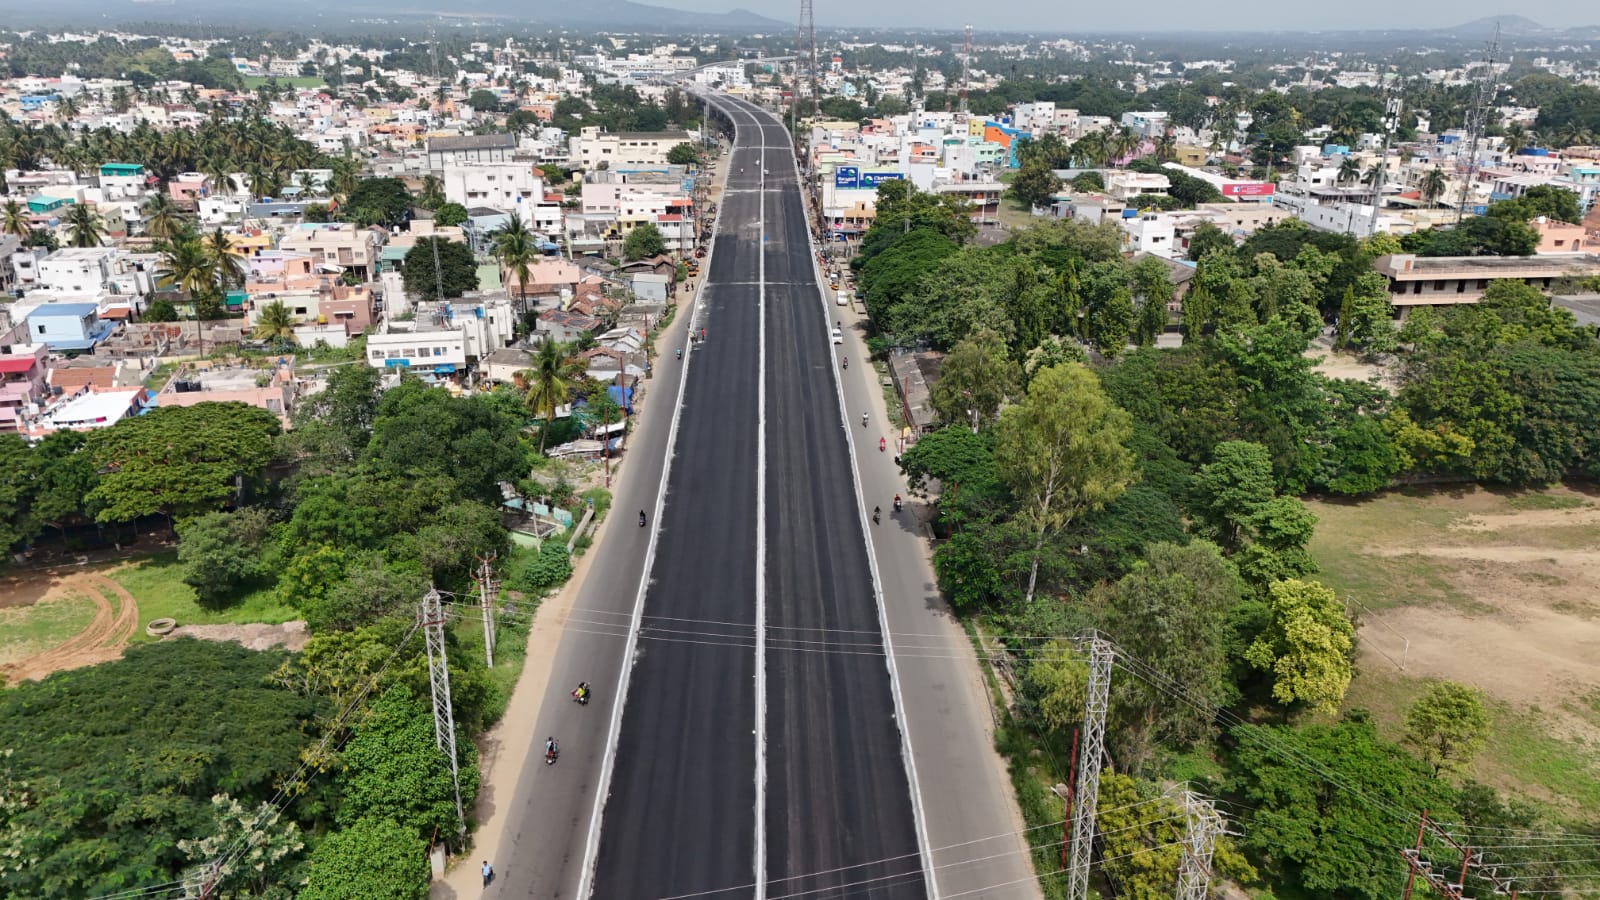 KCP Infra Limited Unveils Coimbatore Periyanaickenpalayam Flyover, a Rs. 100 Crore Marvel Set to Transform Regional Connectivity